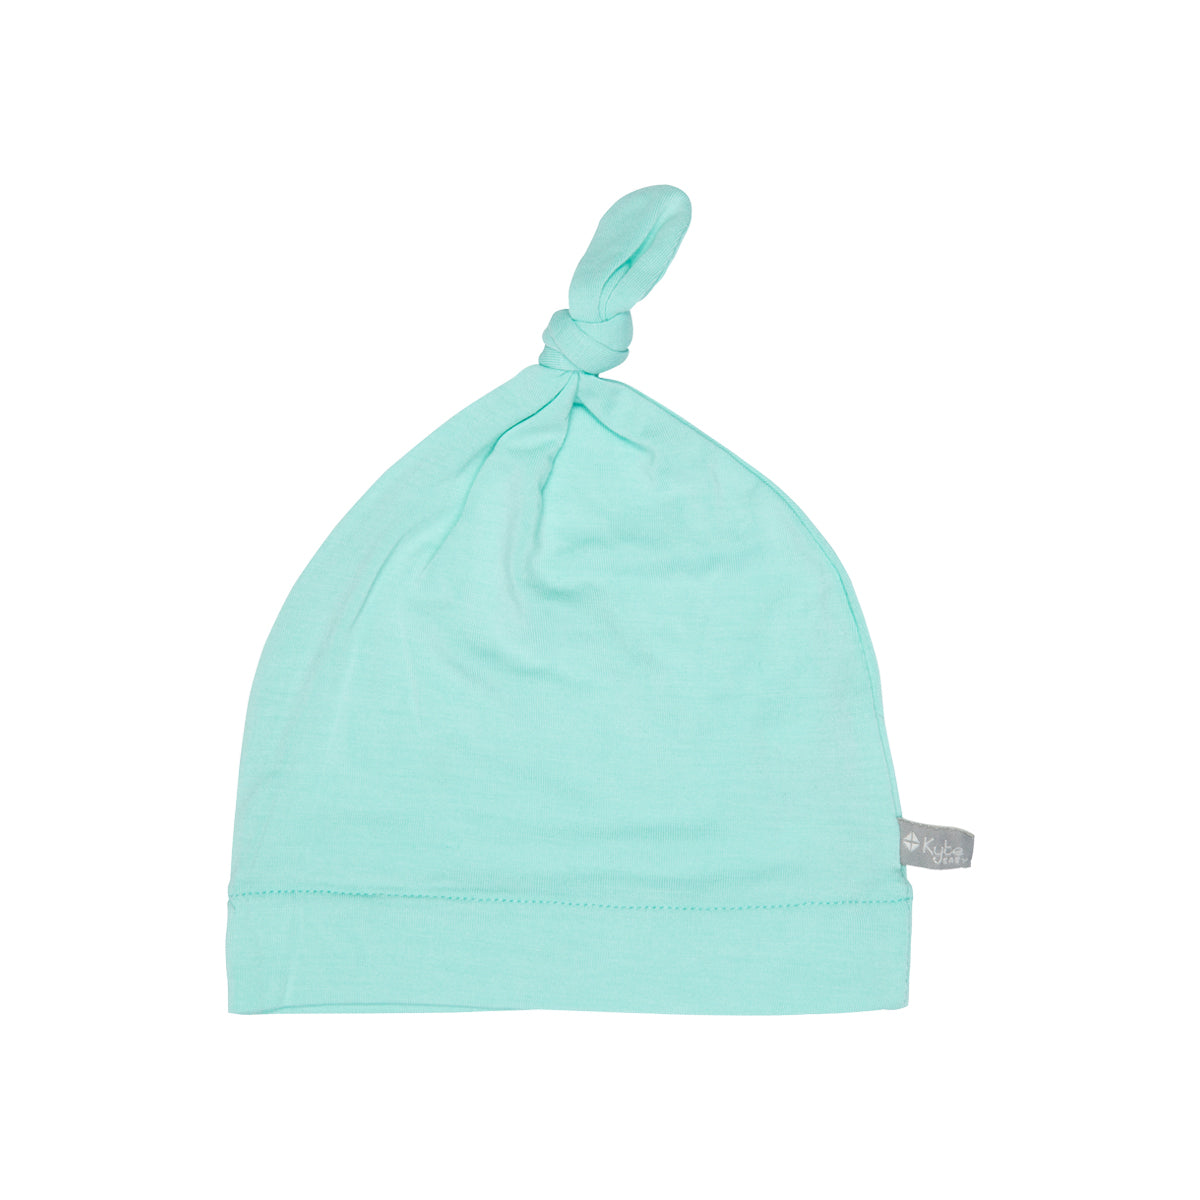 Kyte Baby Knotted Cap - Aqua